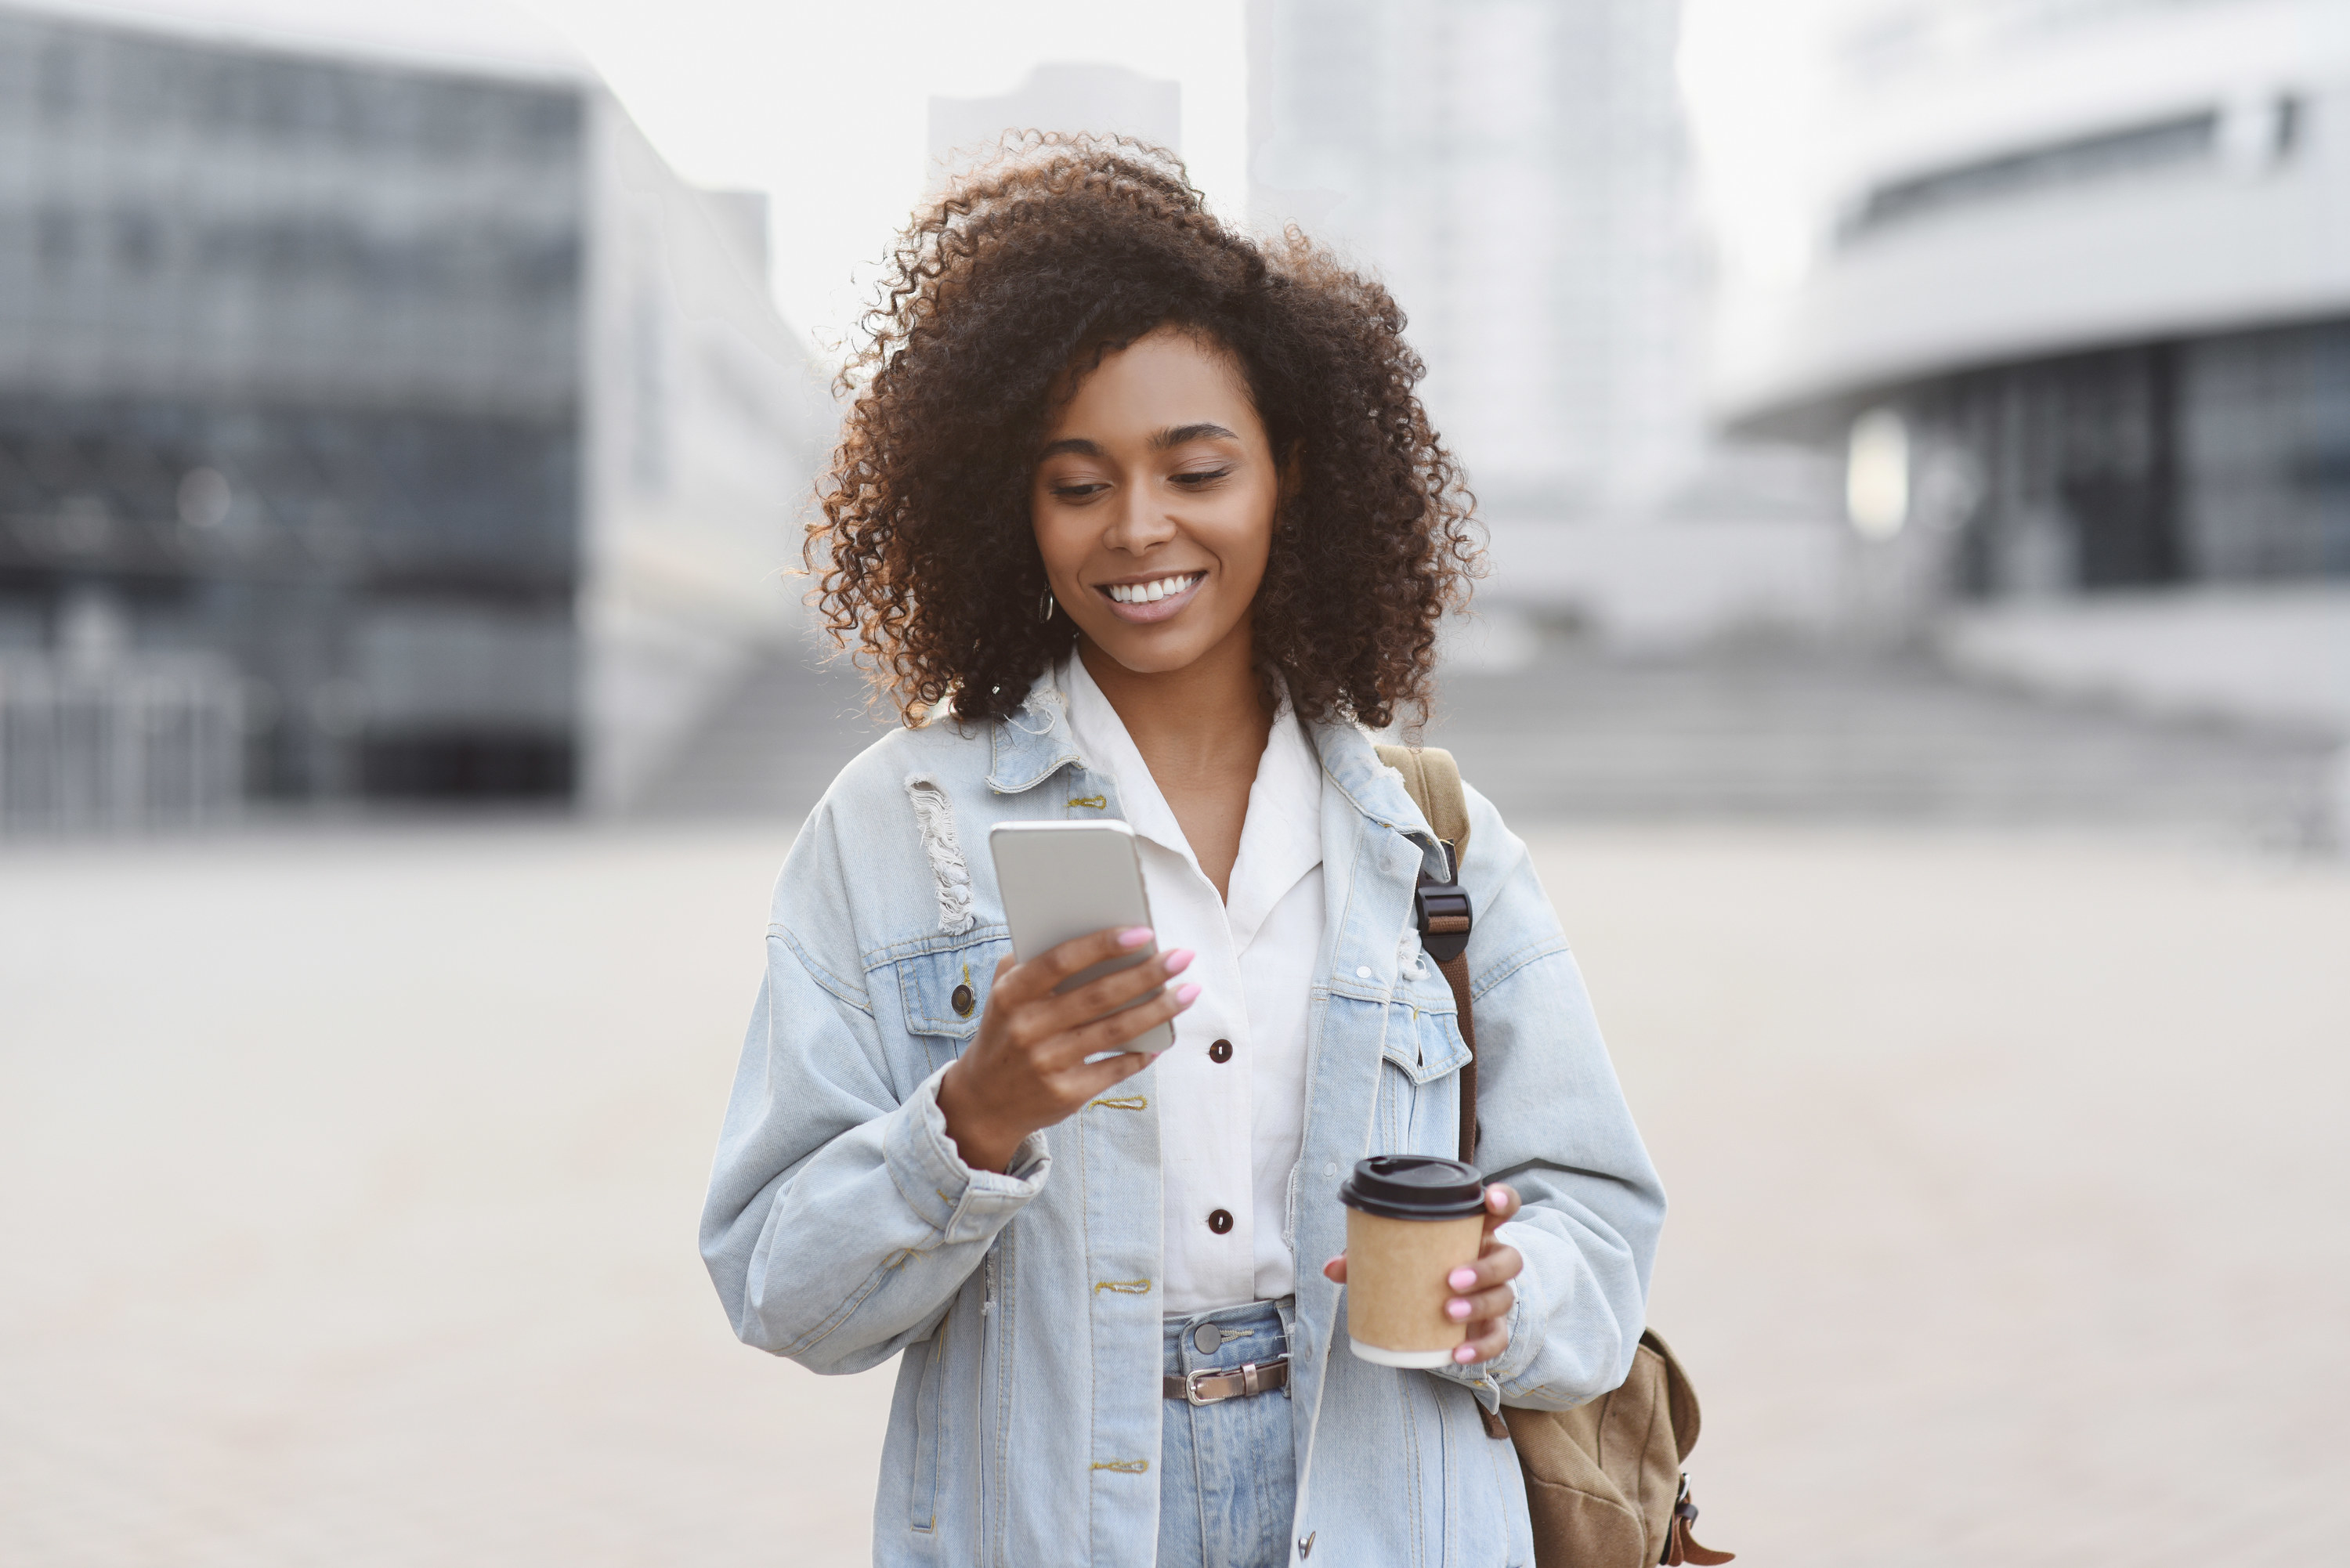 A woman staring at her phone with a smile on her face while carrying a coffee